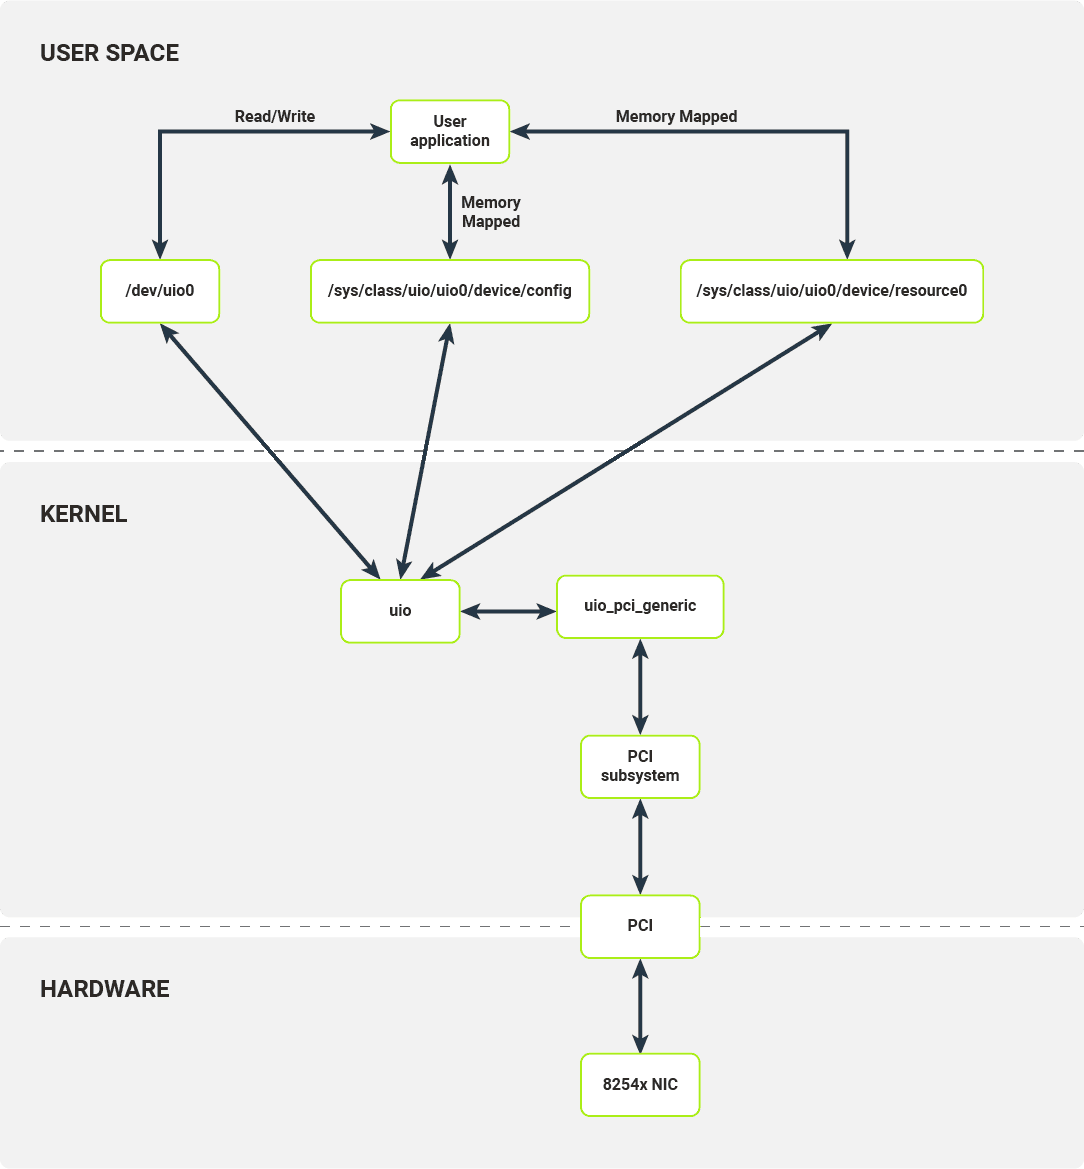 Software layers of a networking stack on Linux when using UIO